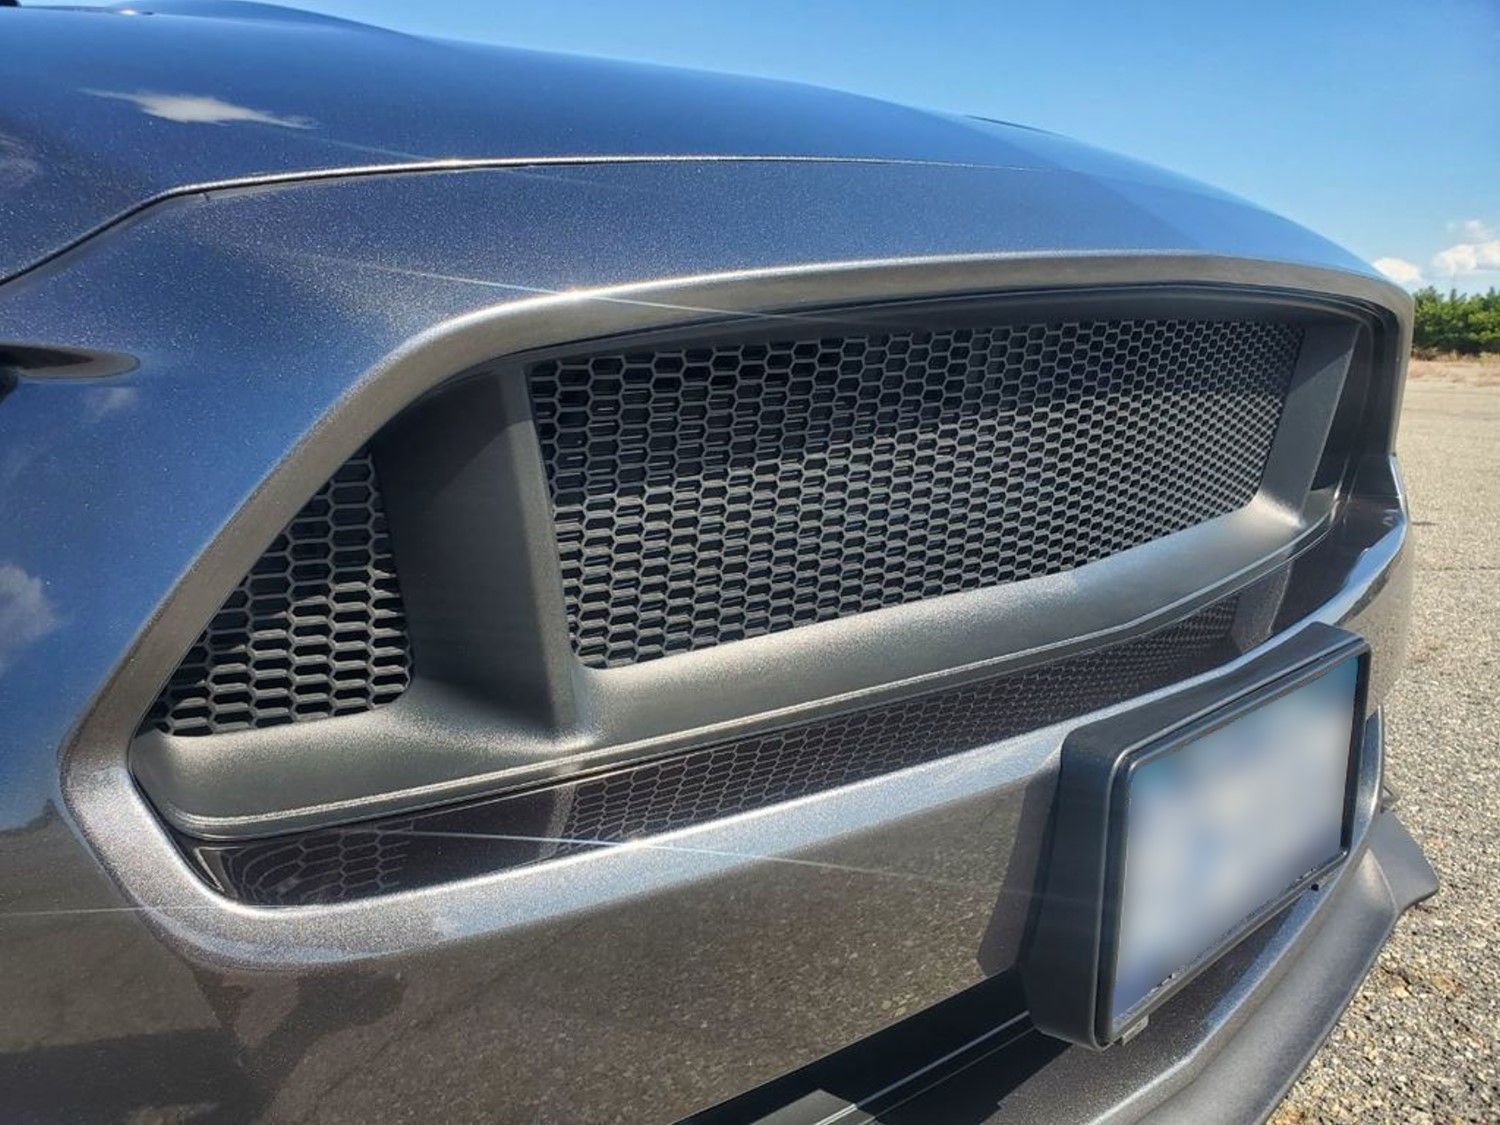 OEM Style Custom Grilles Made Easy - Plastic Diamond Mesh on 50th Anniversary Edition Ford Mustang GT